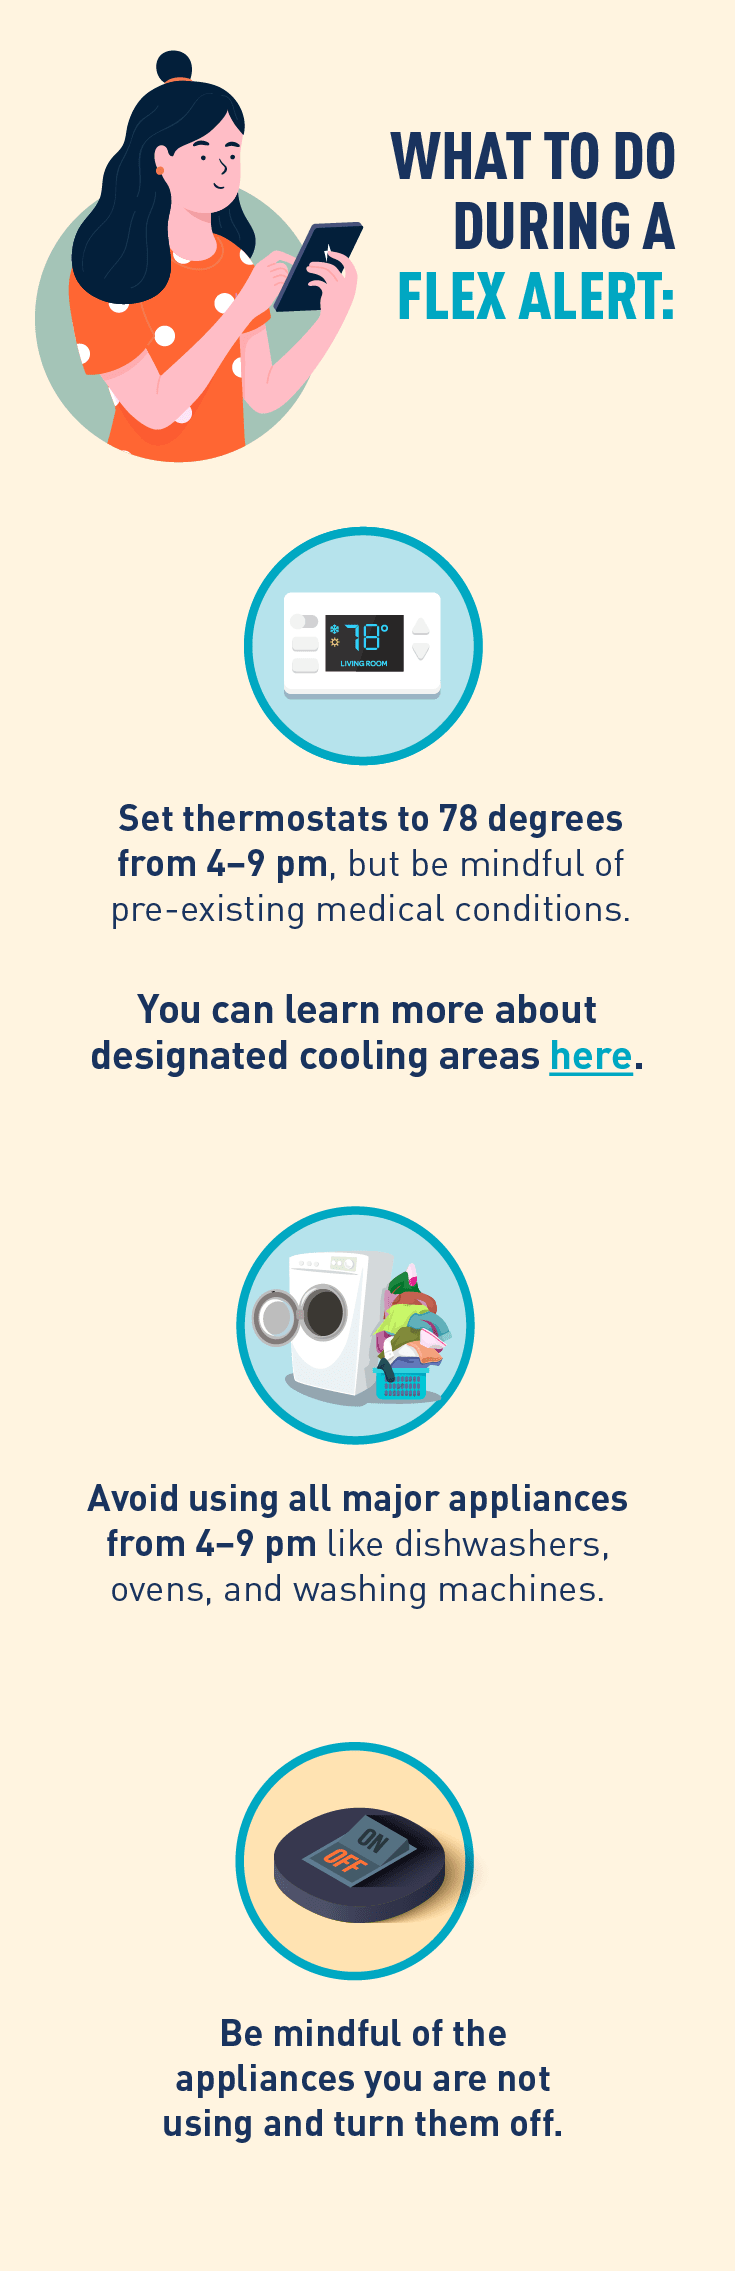 Graphics of a woman using a phone, thermostat at 78 degrees, washing machine and on and off switch. Description:  WHAT TO DO DURING A FLEX ALERT:  Set thermostats to 78 degrees from 4-9 pm, but be mindful of pre-existing medical conditions.  You can learn more about designated cooling areas here.  Avoid using all major appliances from 4-9 pm like dishwashers, ovens, and washing machines.  Be mindful of the appliances you are not using and turn them off.